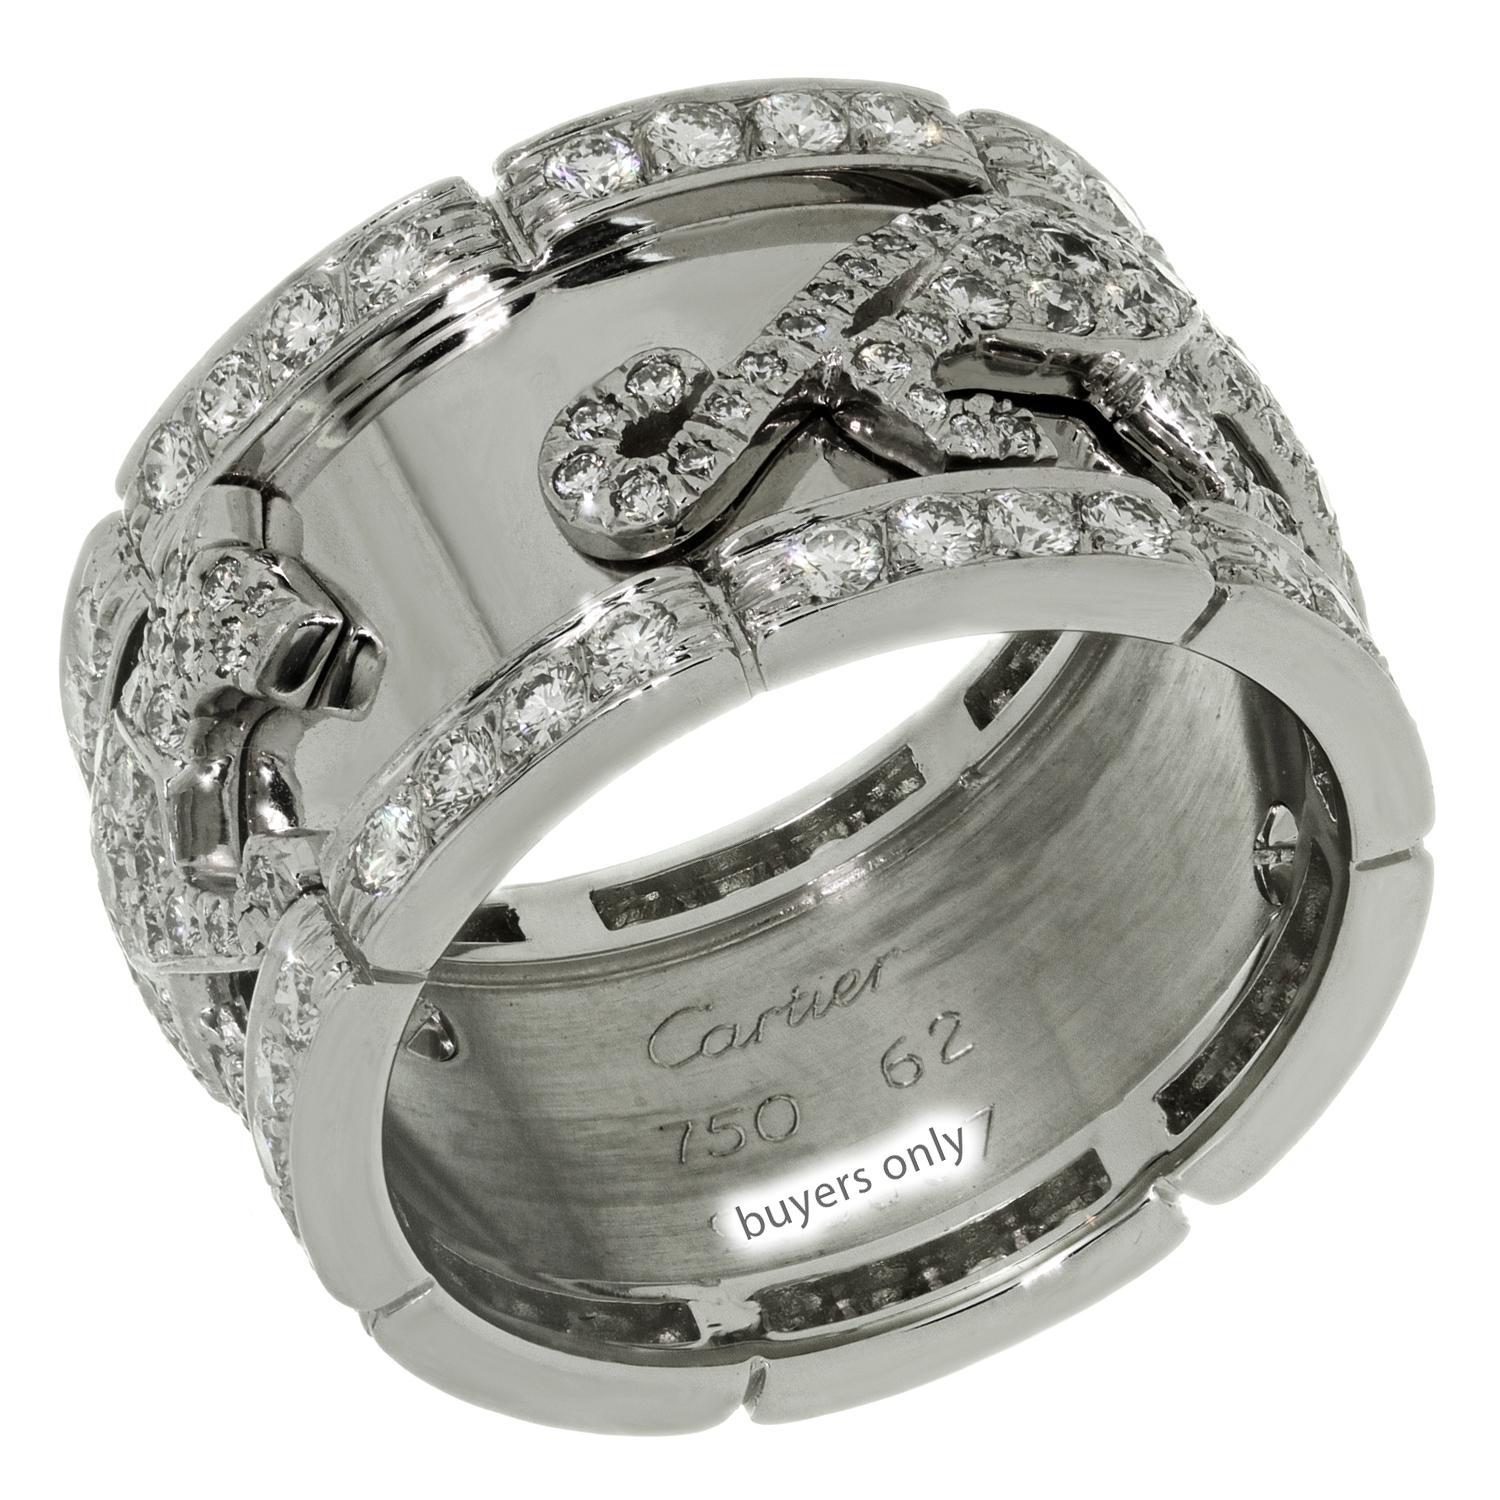 Brilliant Cut Cartier Panther Mahango Diamond White Gold Band Ring. Sz. 62 For Sale